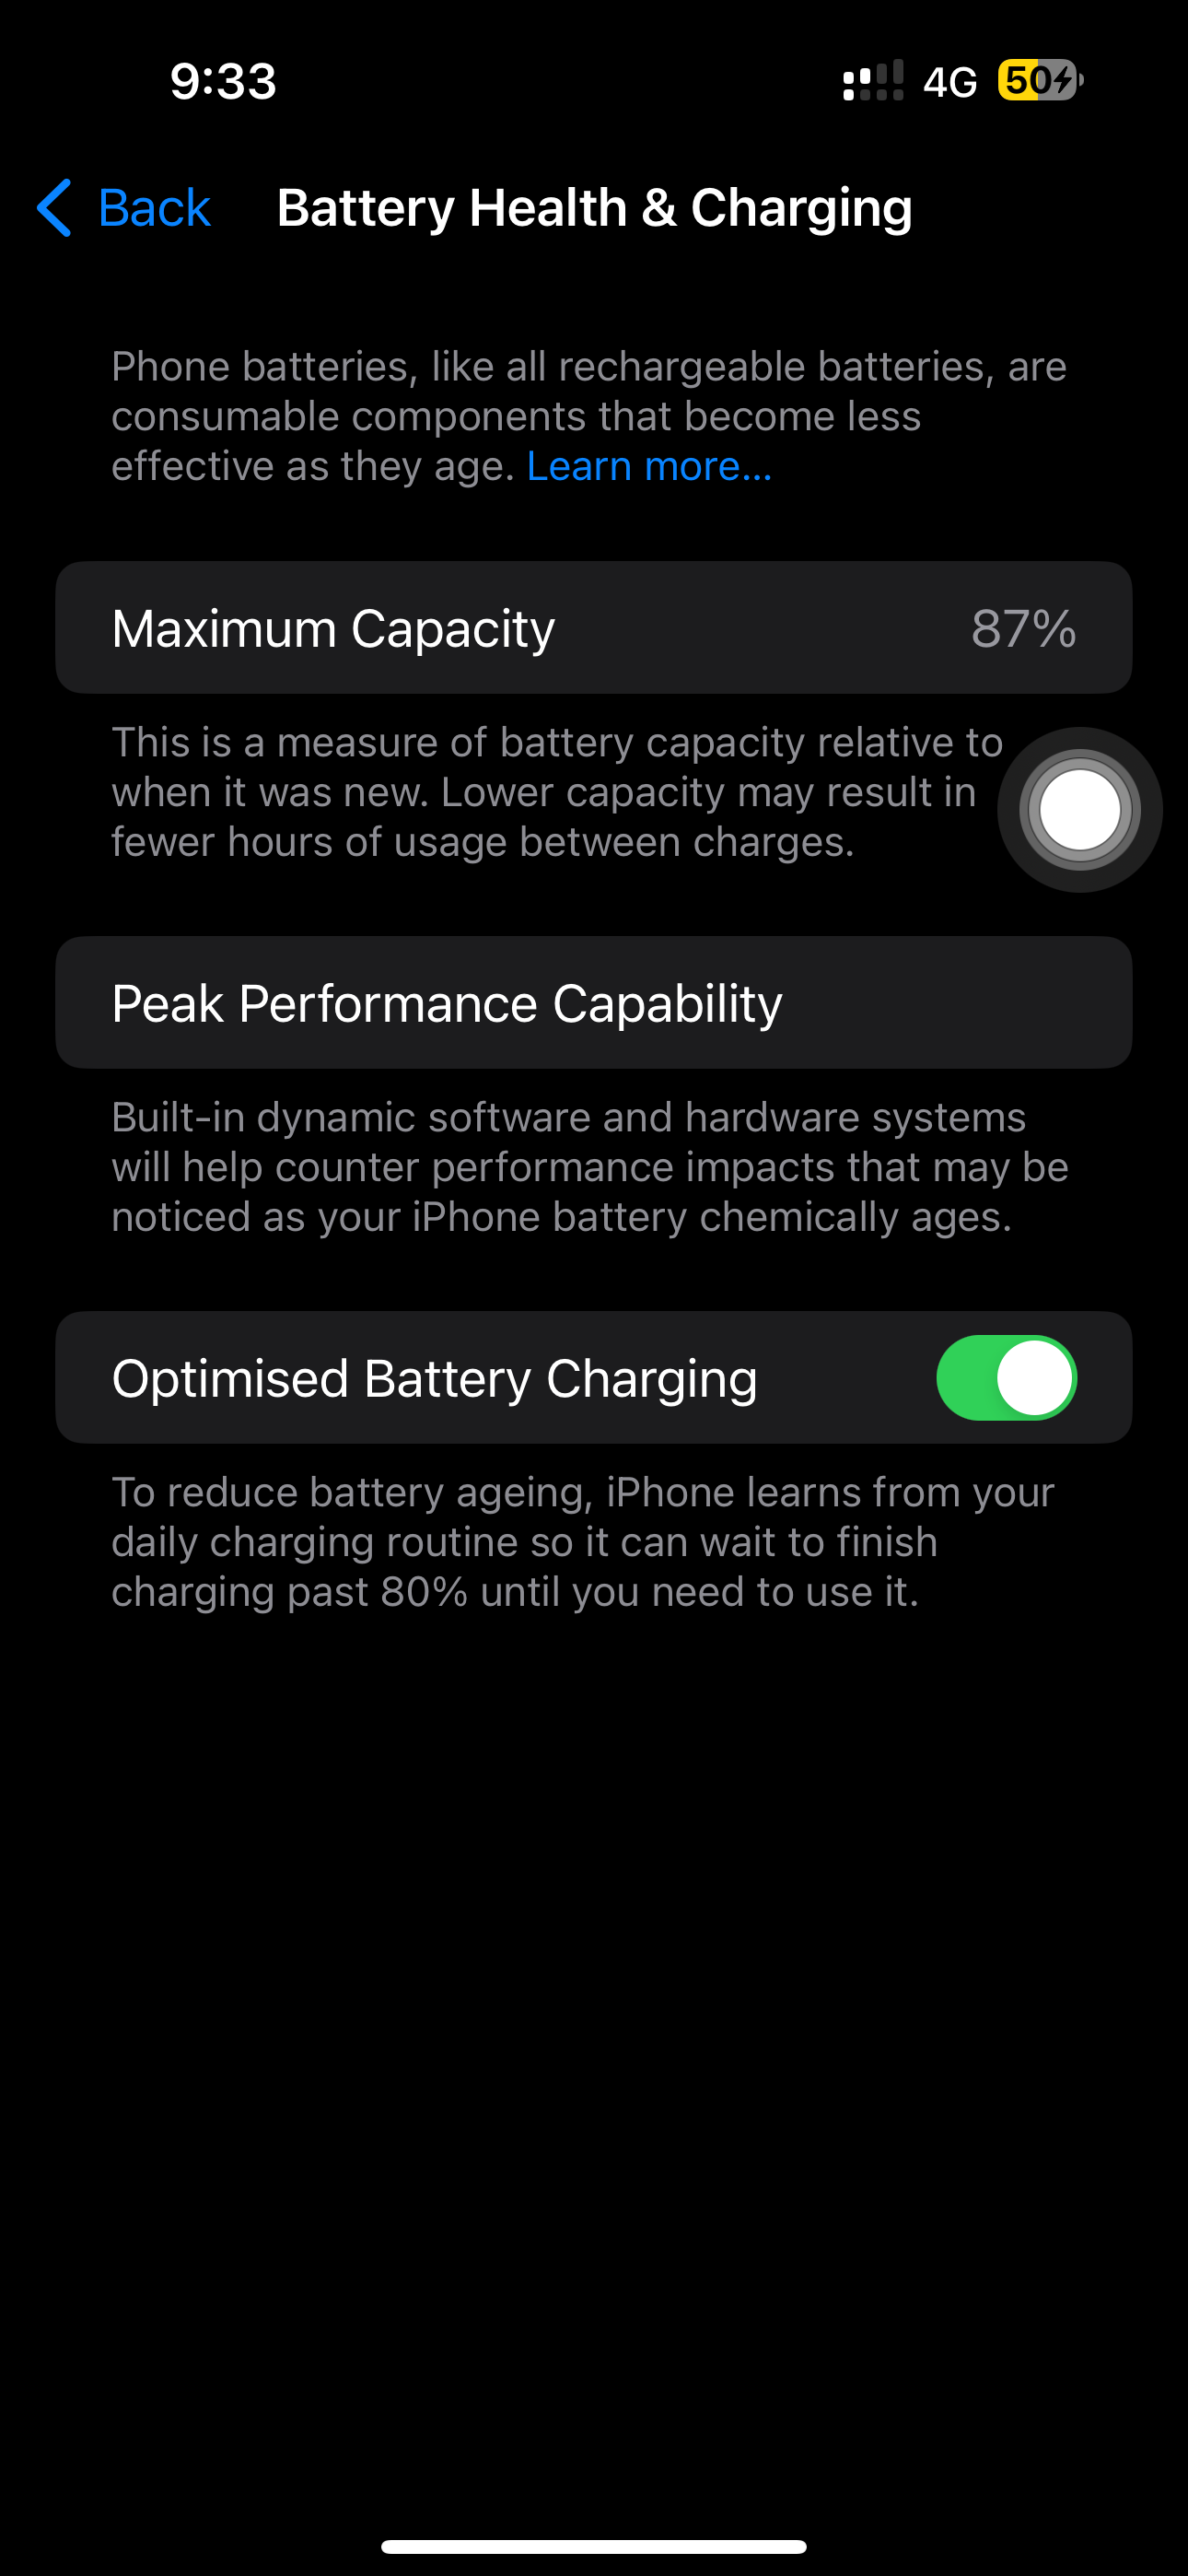 Subscription to location updates can lead to excessive battery